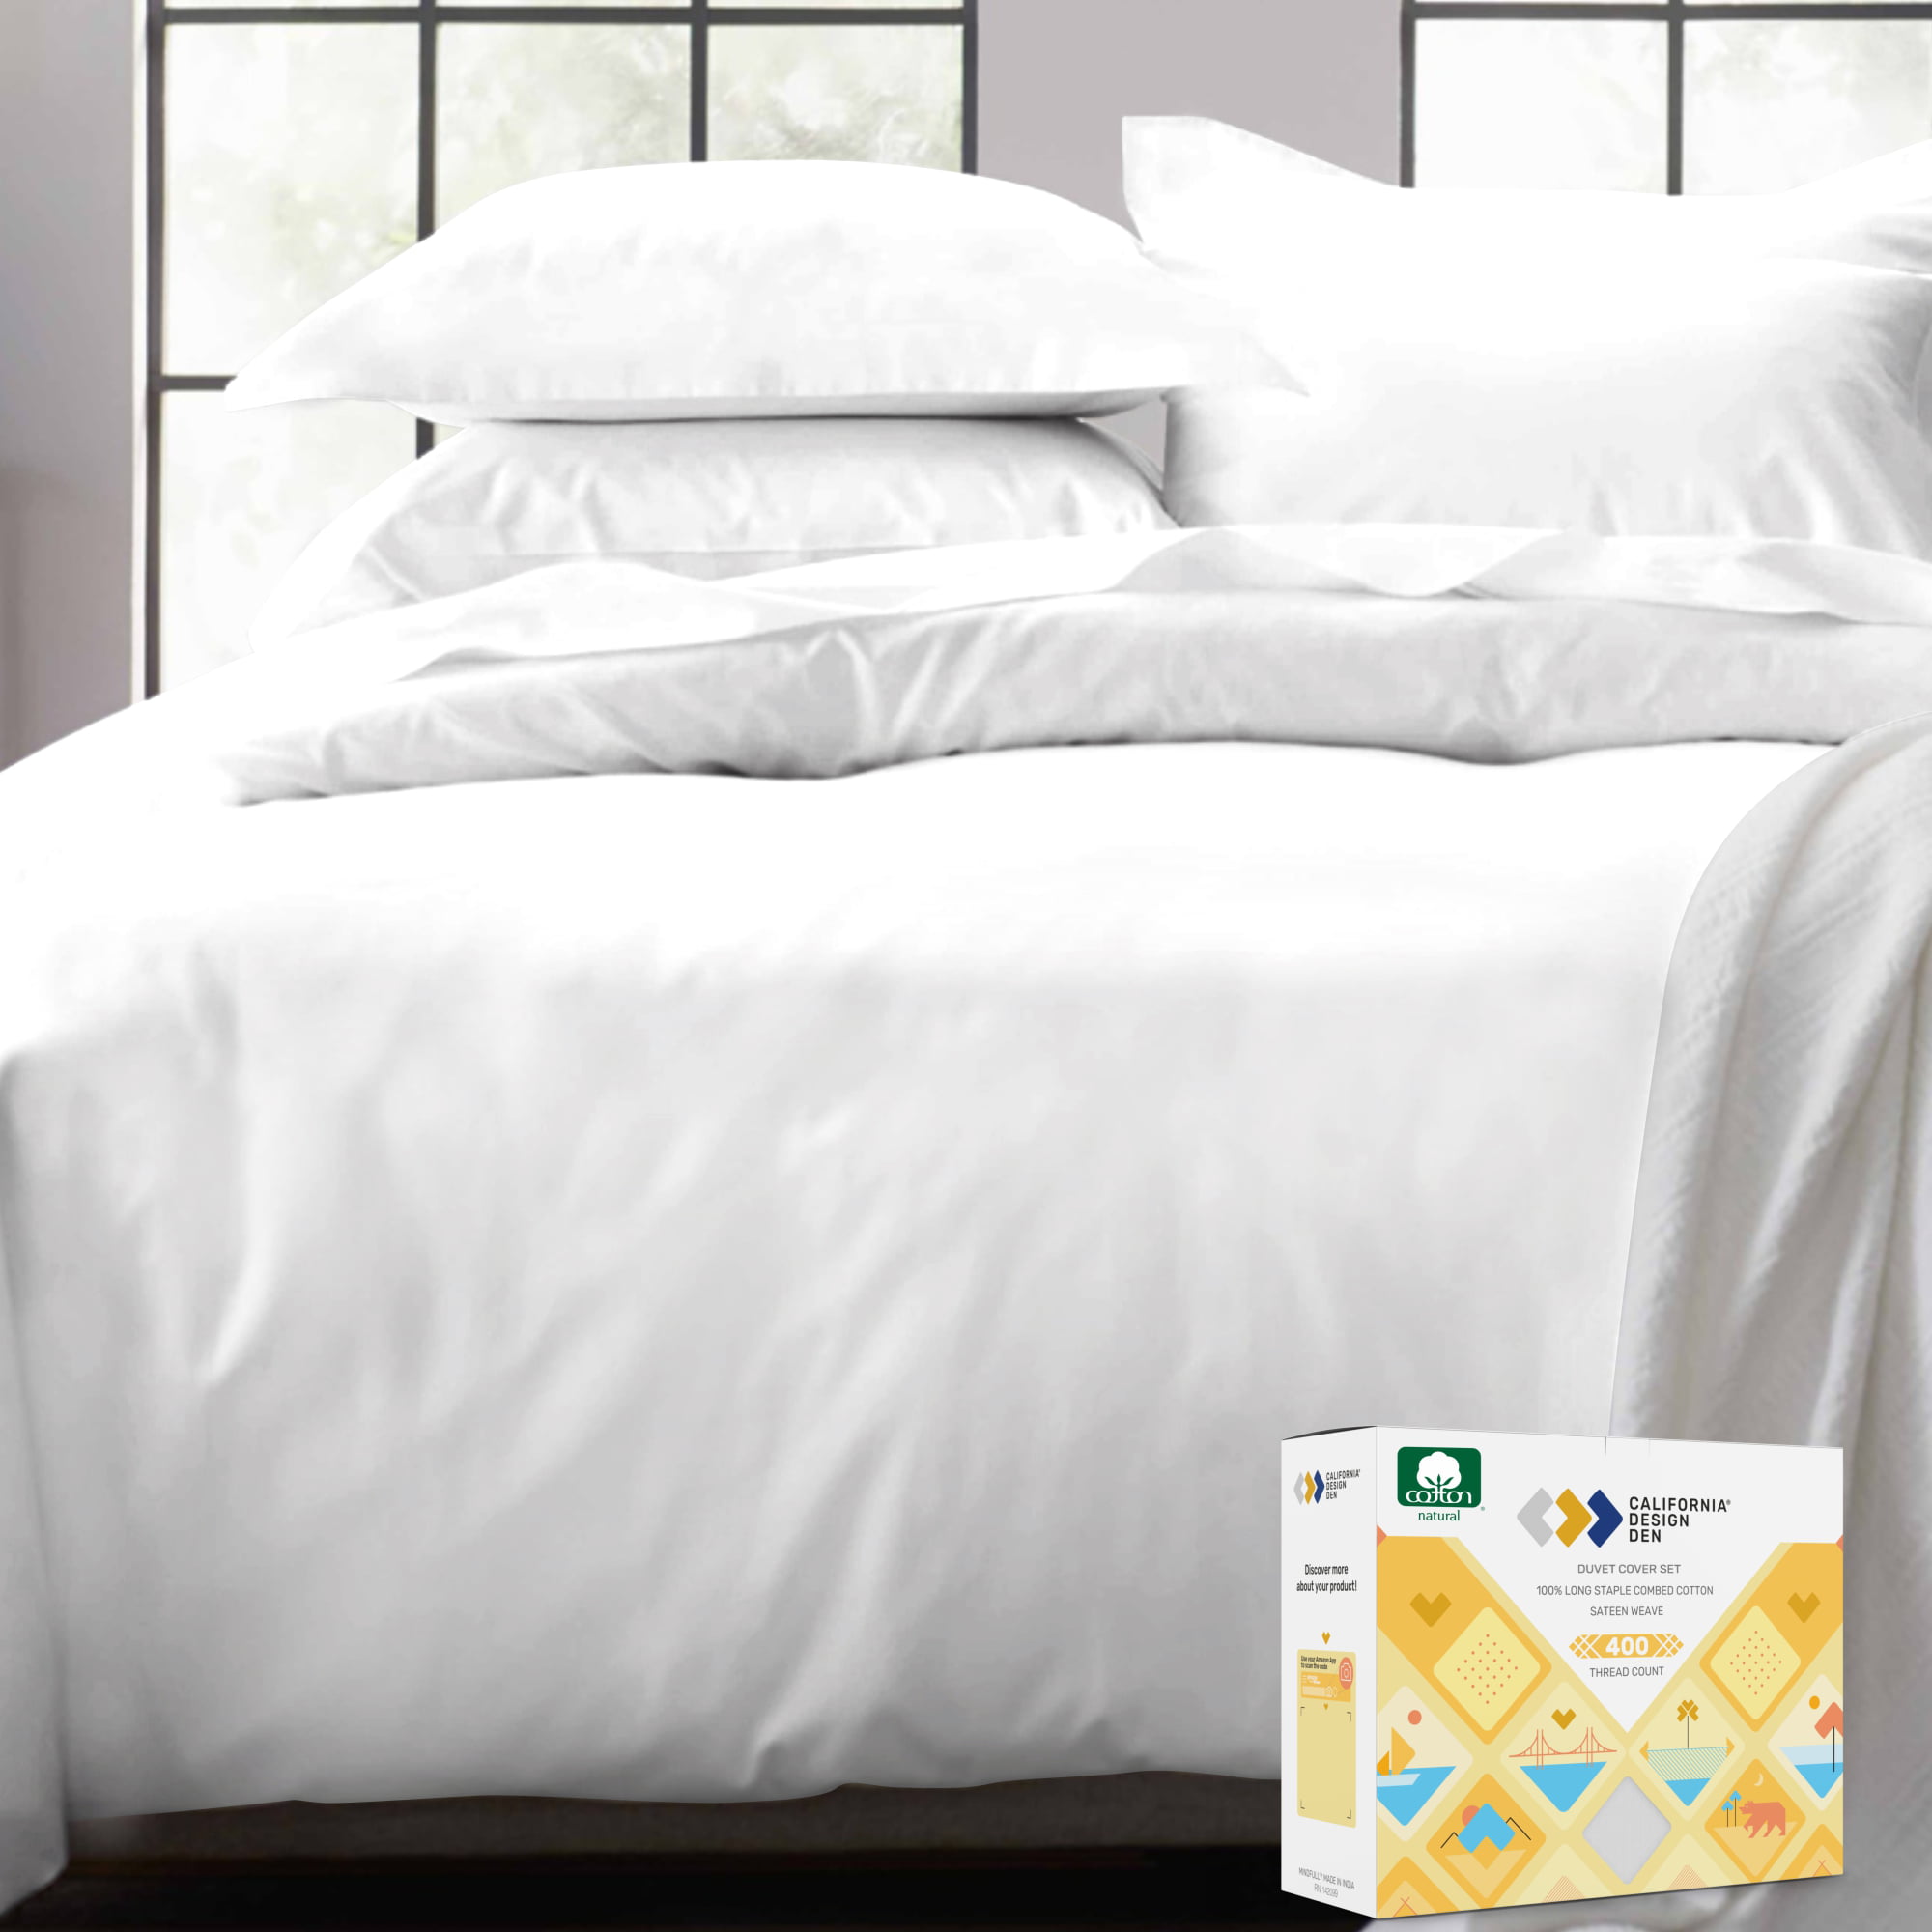 Green Queen-Full Duvet Cover Sets Pizuna 400 Thread Count Cotton Queen Duvet Cover Set Green Pastures 100% Long Staple Pure Cotton Duvet Covers Soft Sateen Quilt Cover Set with Button Closure